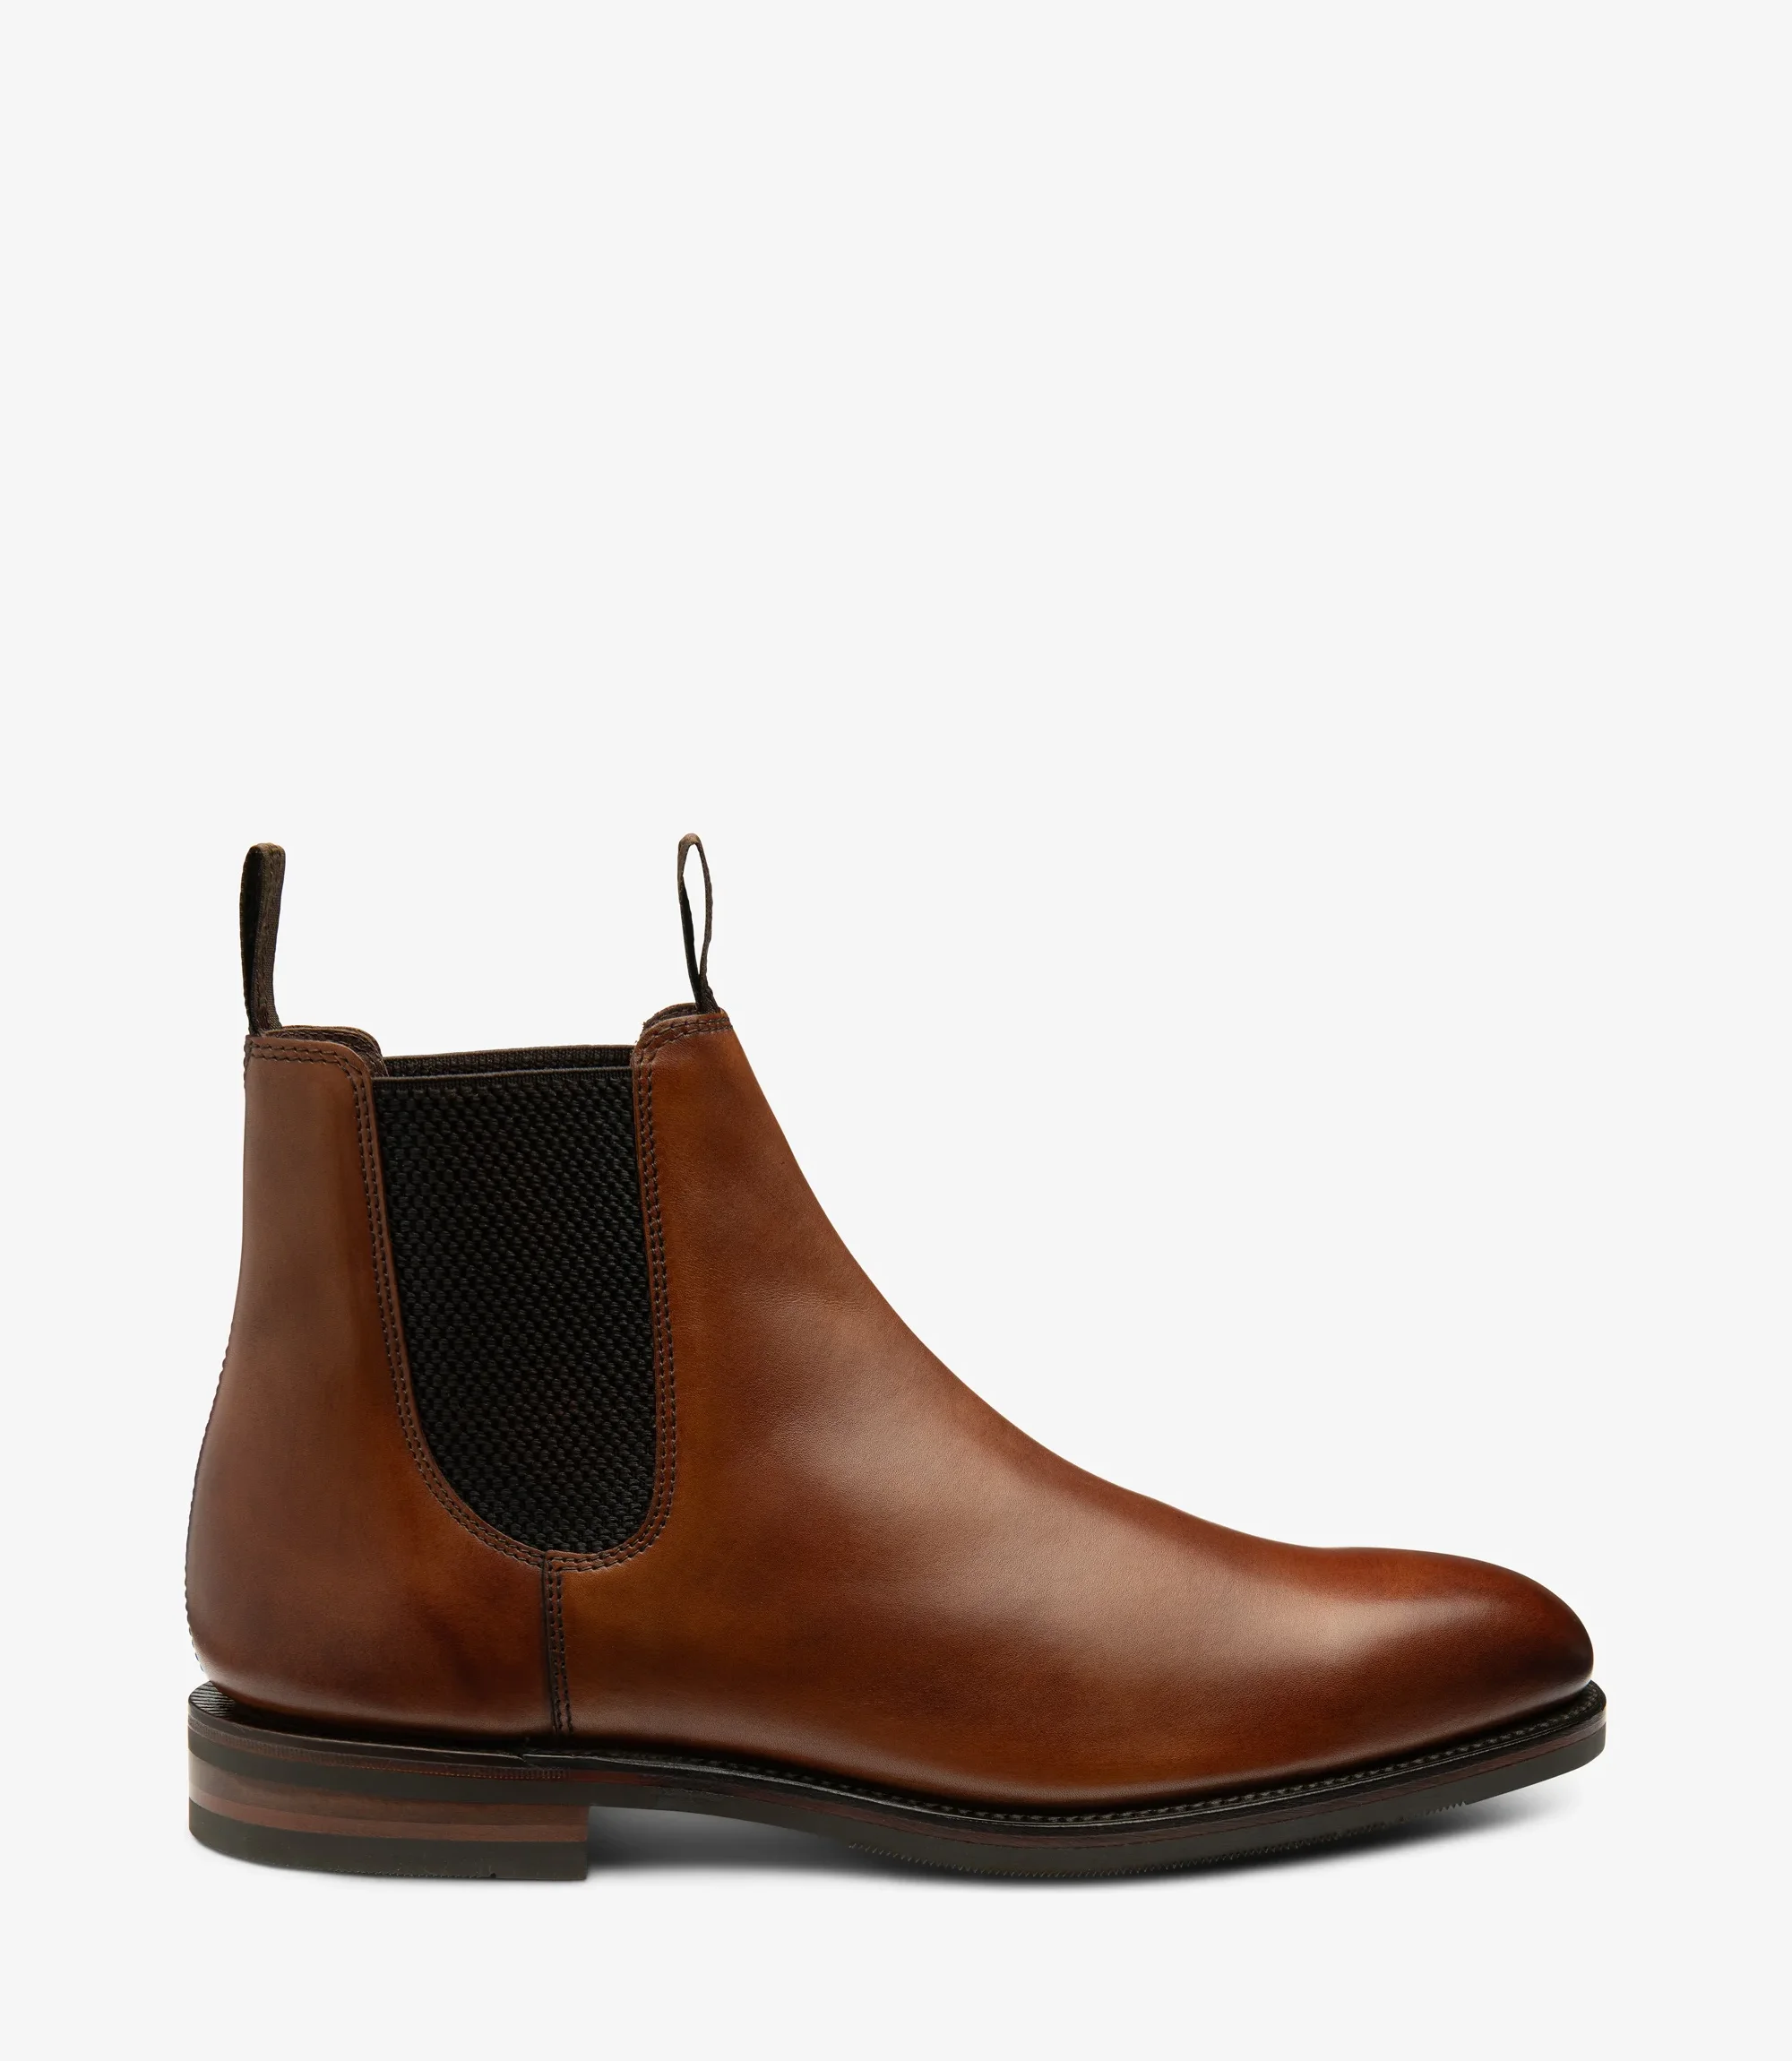 Men's Shoes & Boots | Emsworth boot | Loake Shoemakers